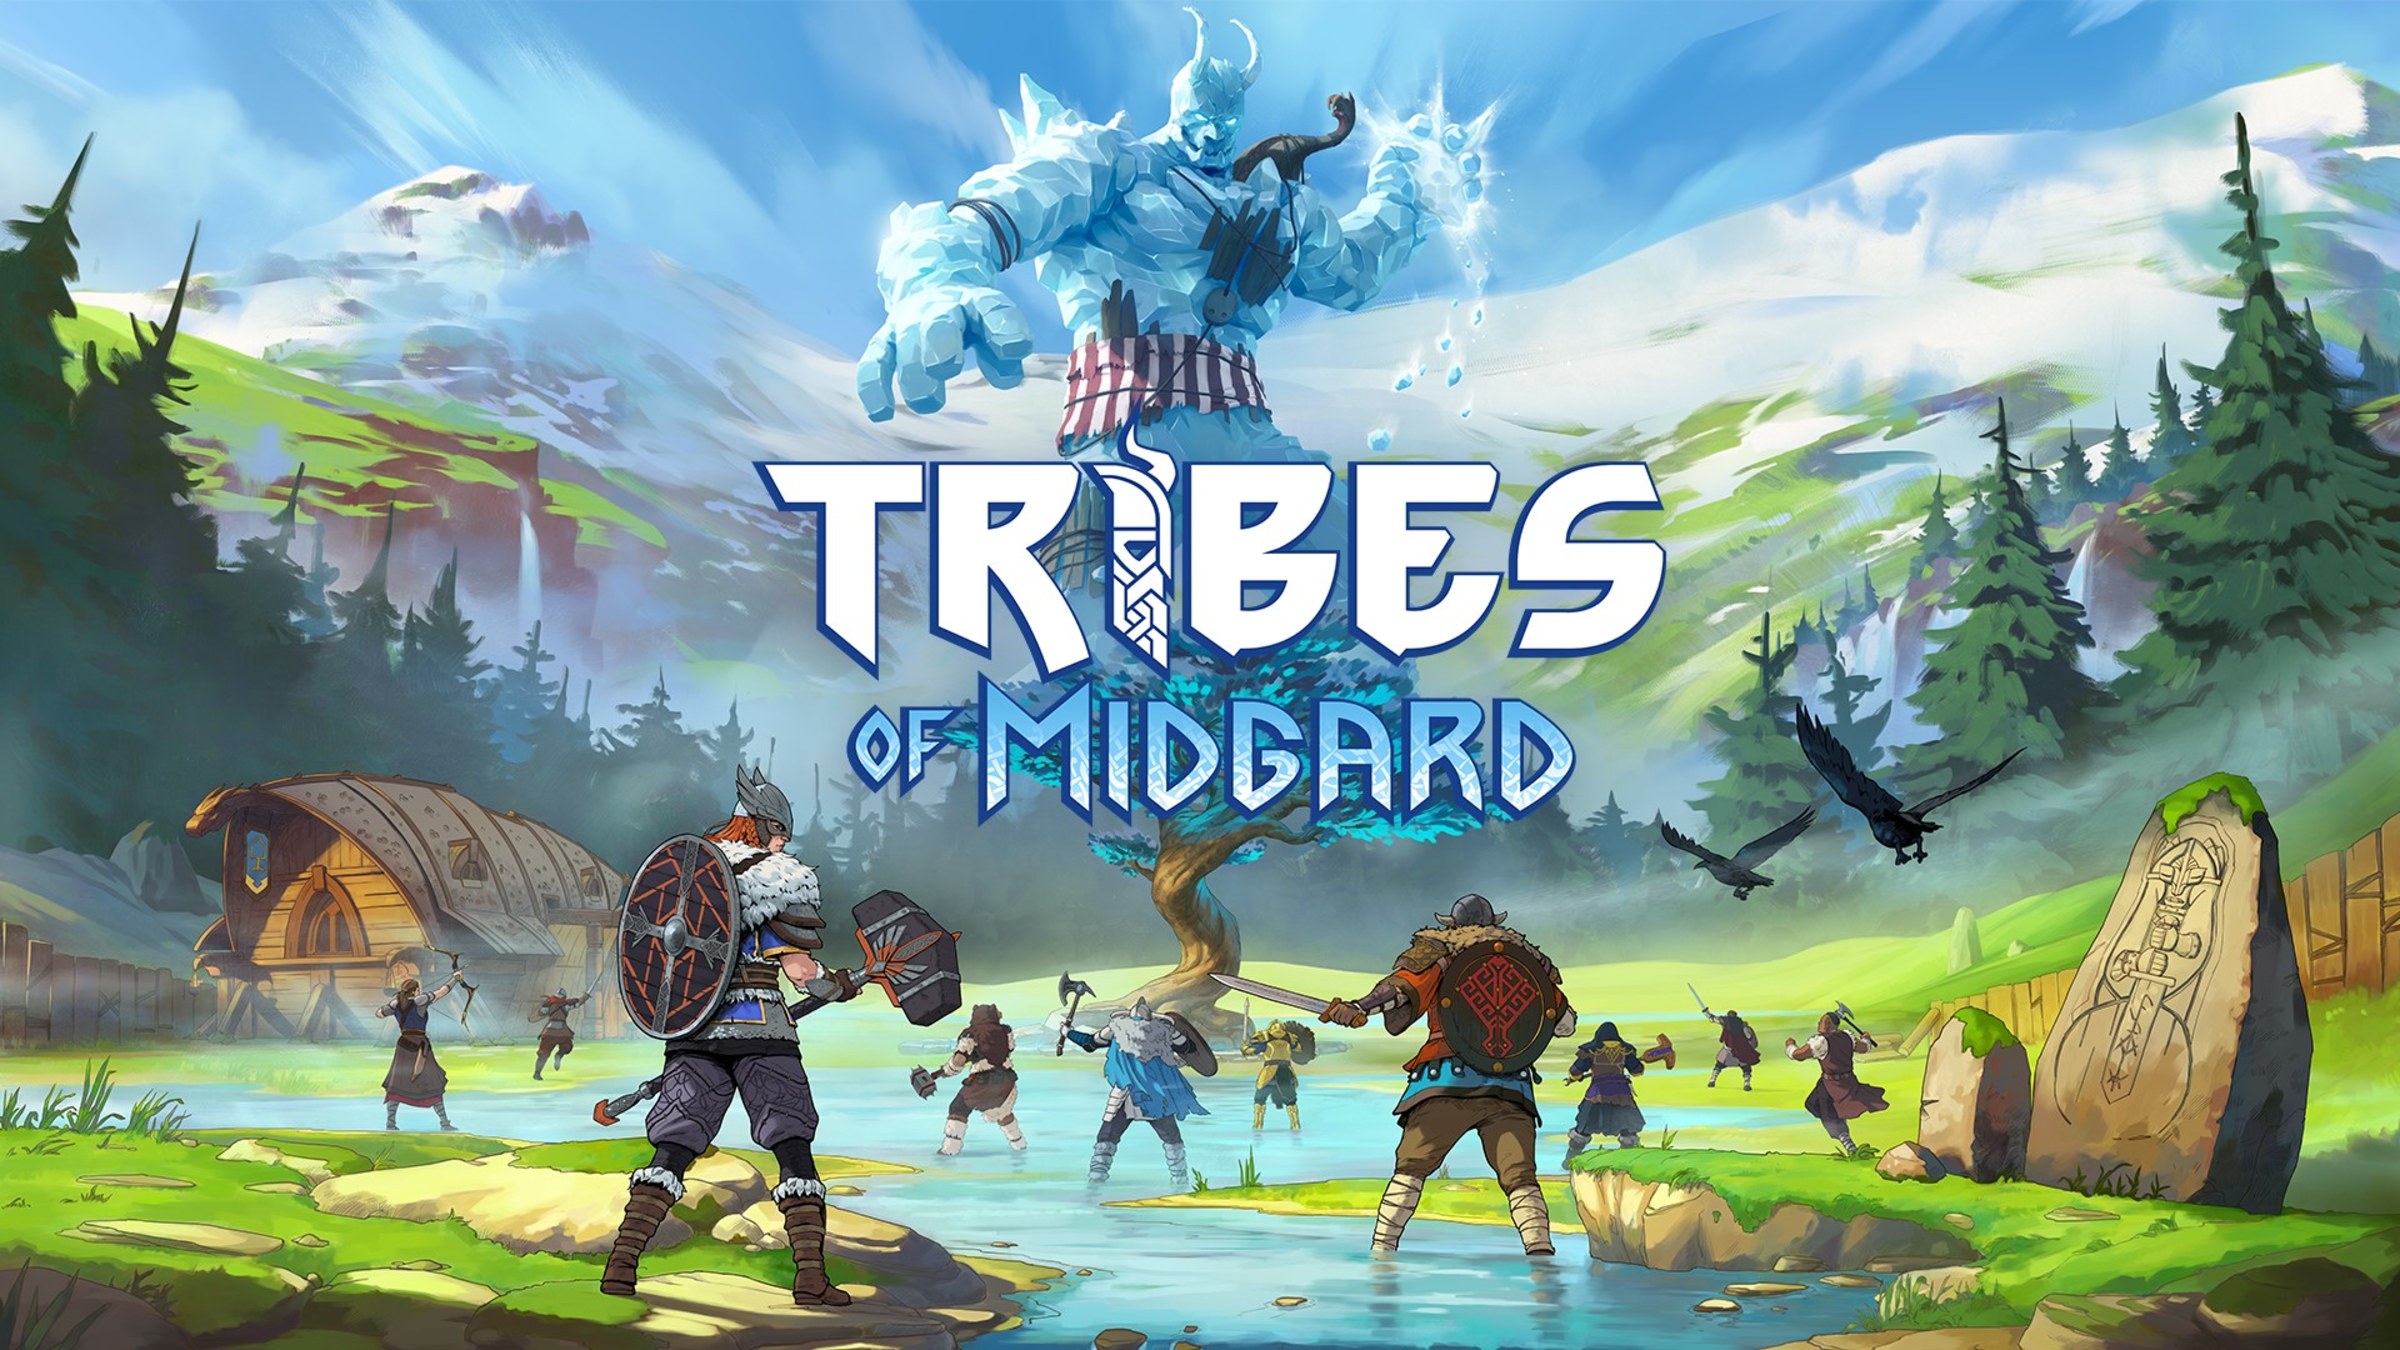 TRIBALS SURVIVAL free online game on